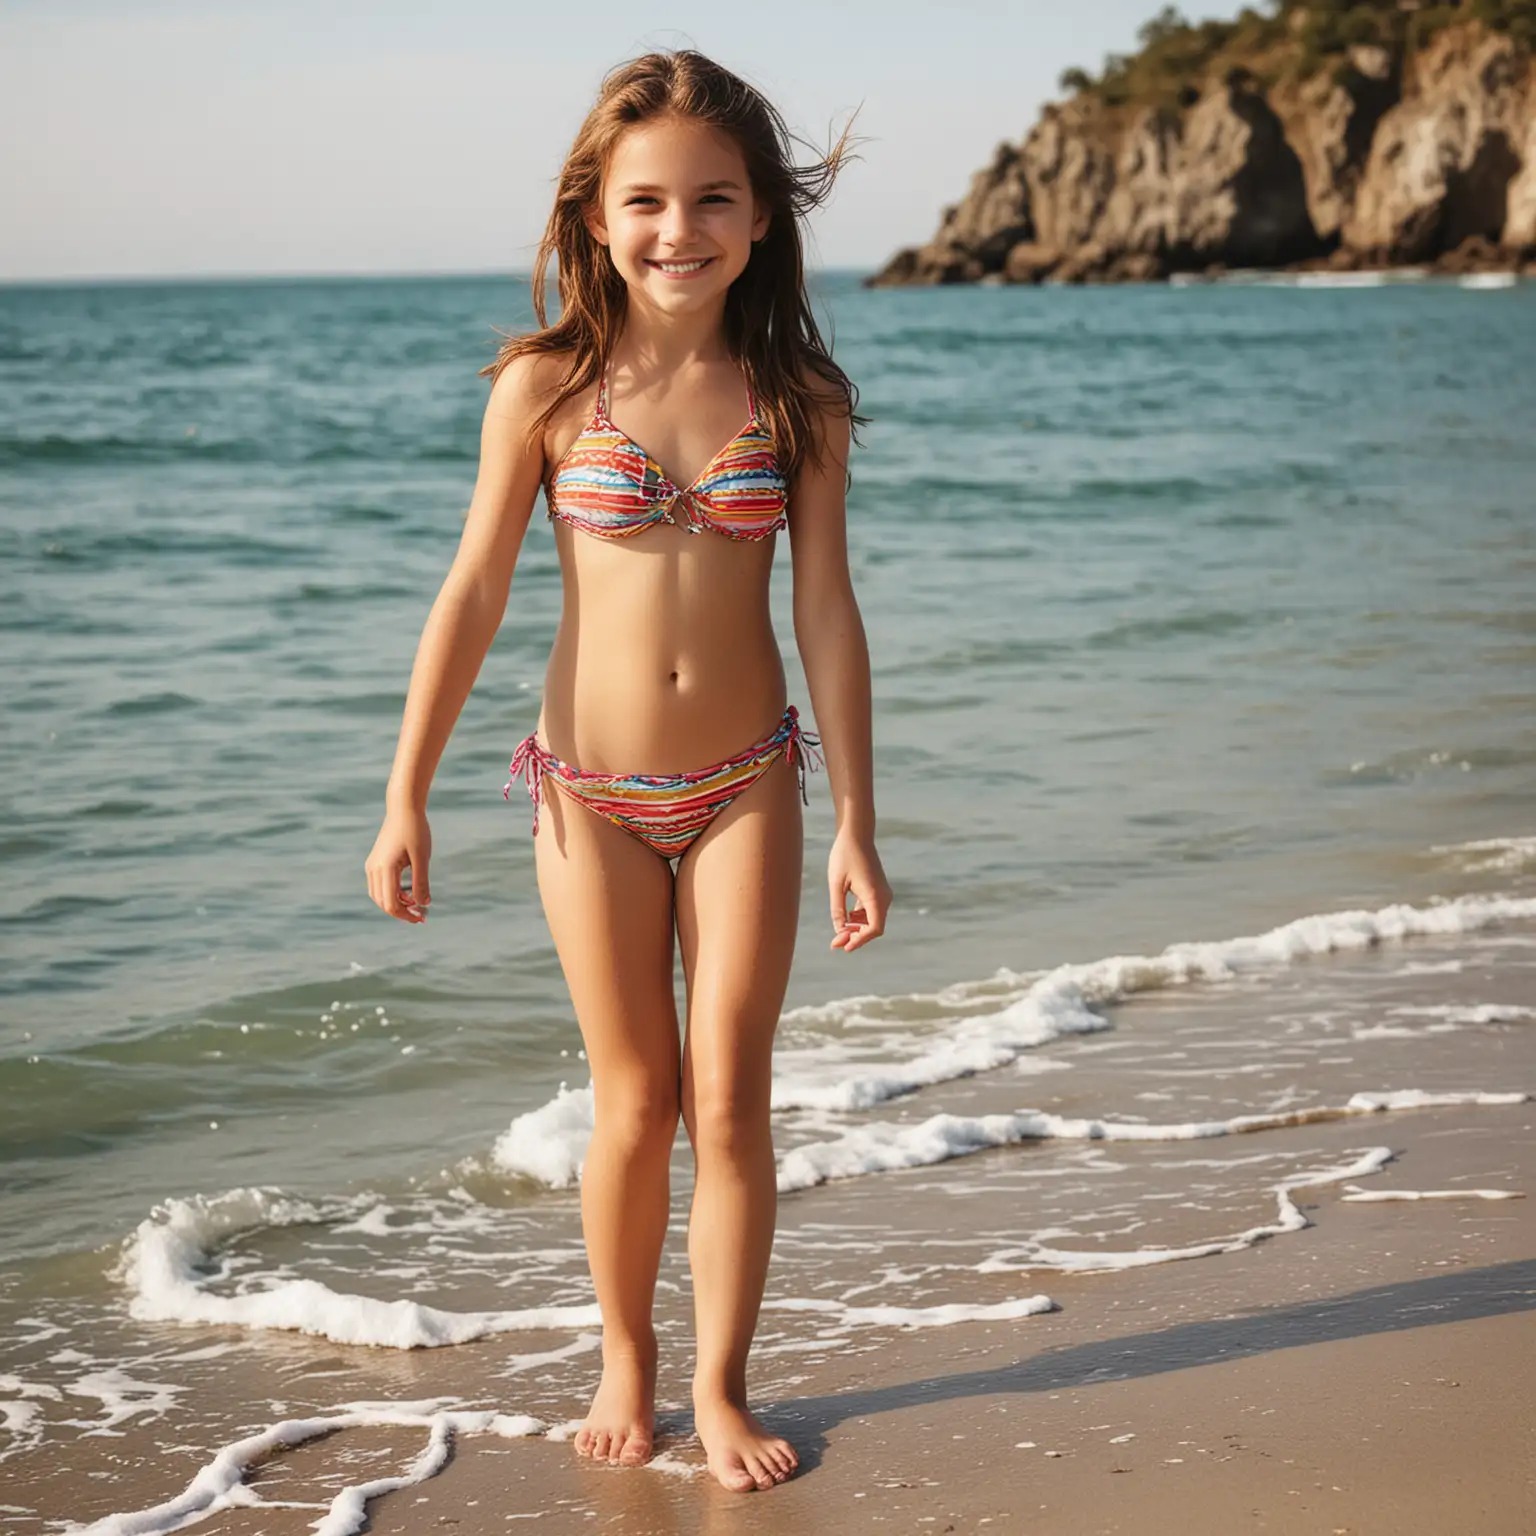 Young-Girl-in-Bikini-Smiling-at-Beach-with-Ocean-Background